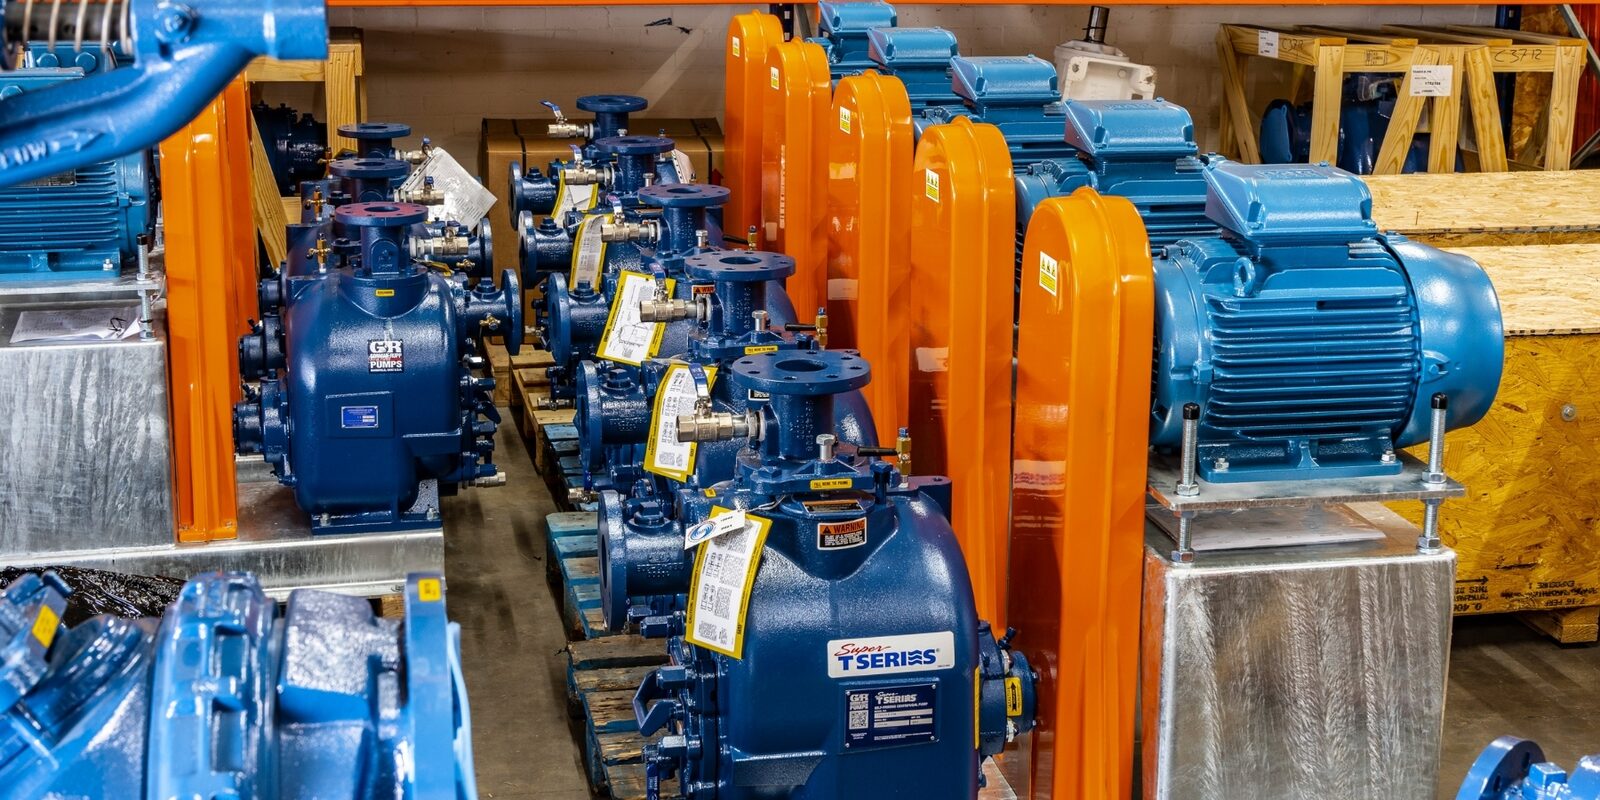 Hydromarque commissioning pumps